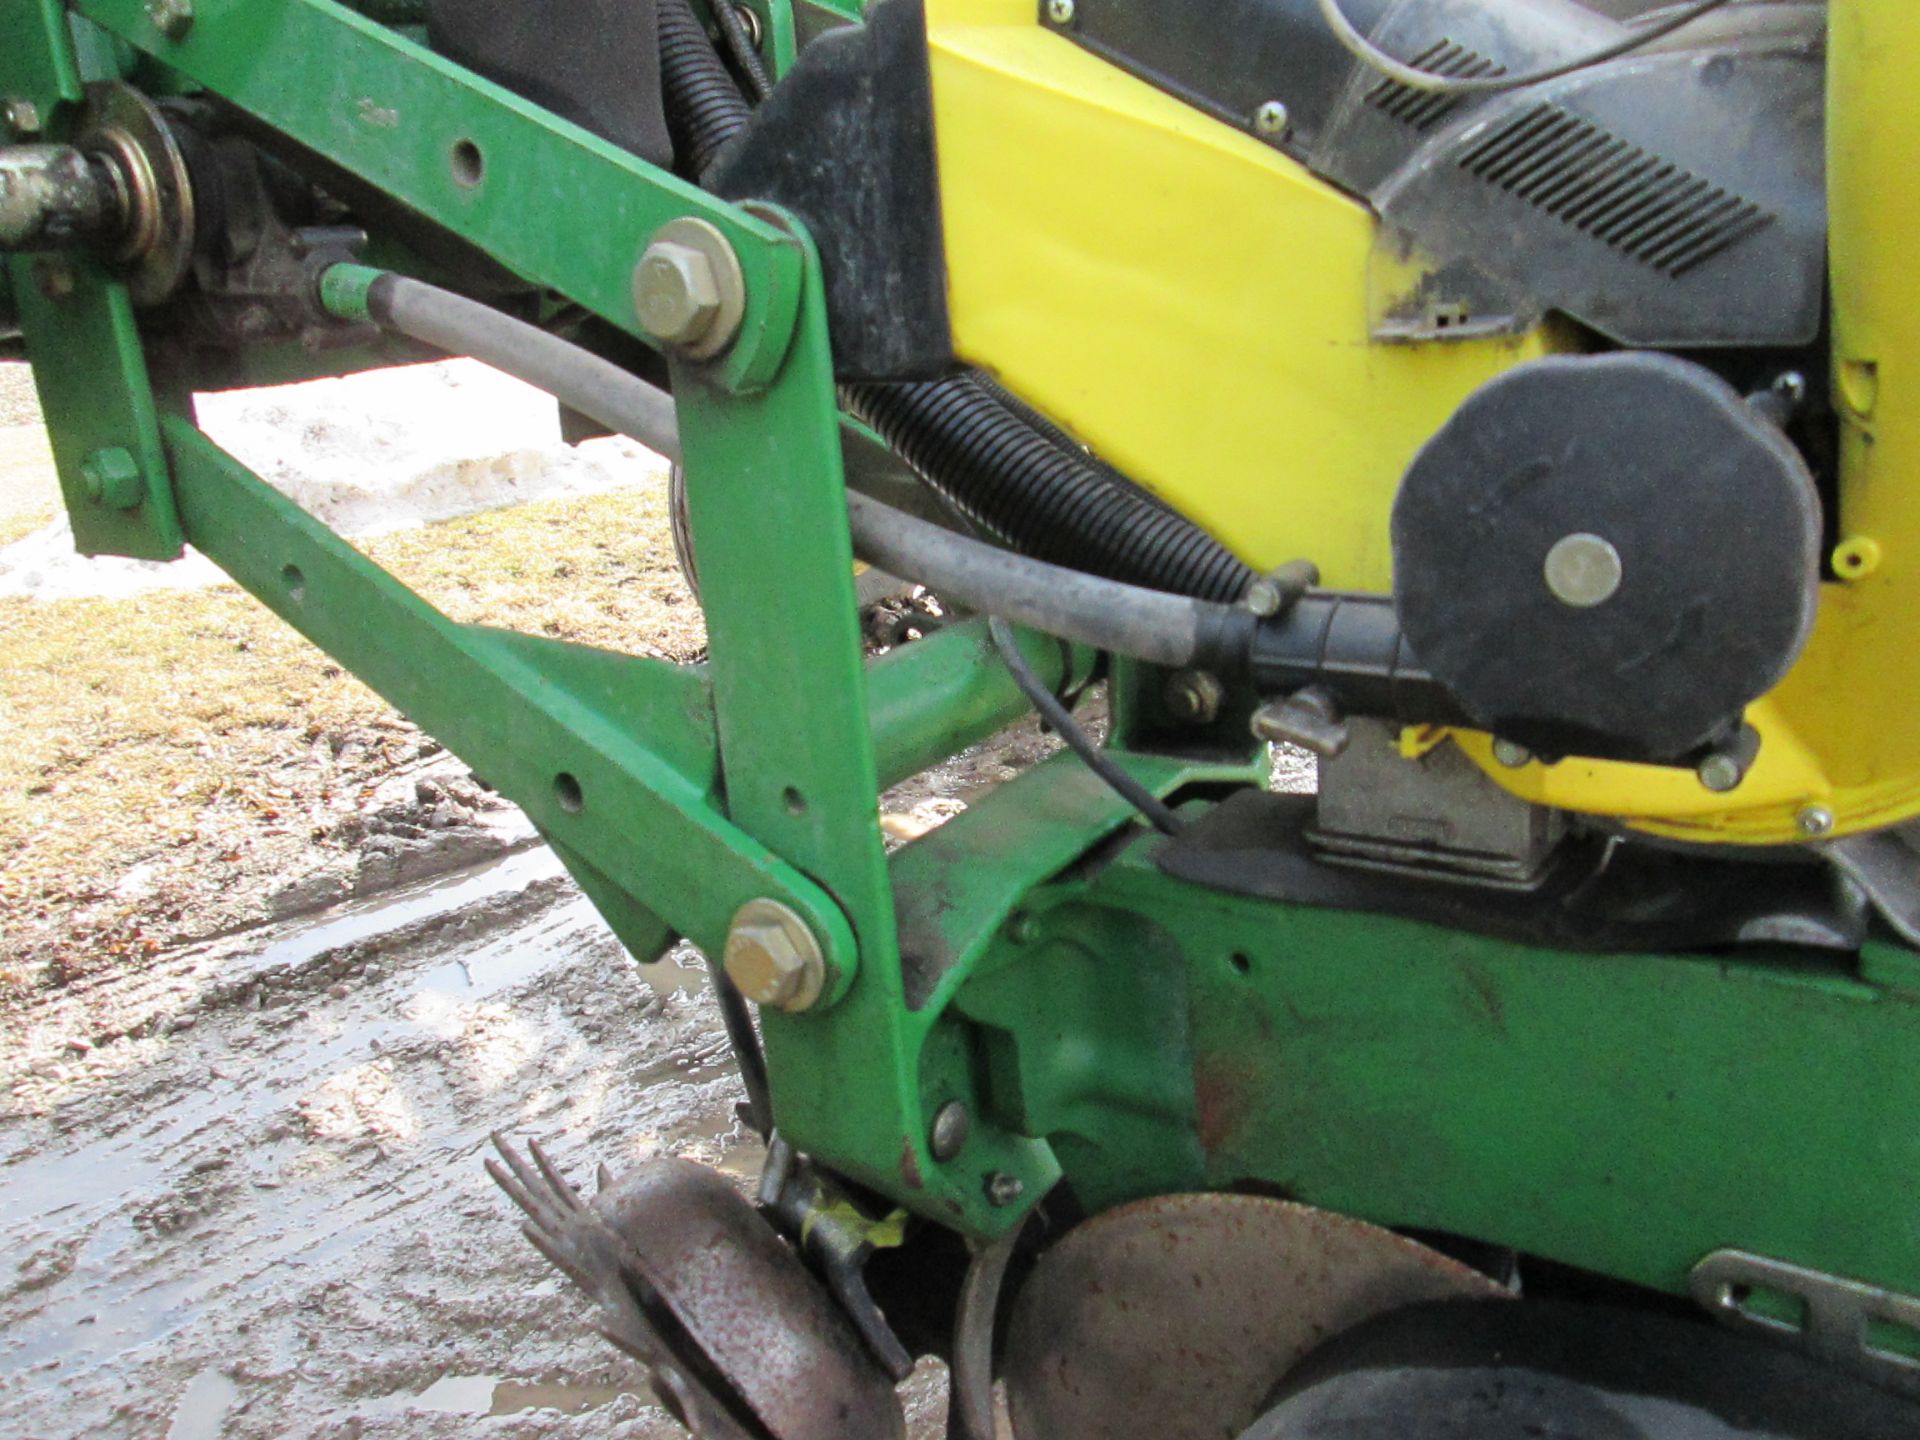 ’06 JD 1770 NT 16R30 PLANTER, CCS,HYDR DRIVE, TRASH WHIPPERS, AG LEADER SHUT OFFS, E-SETS - Image 8 of 16